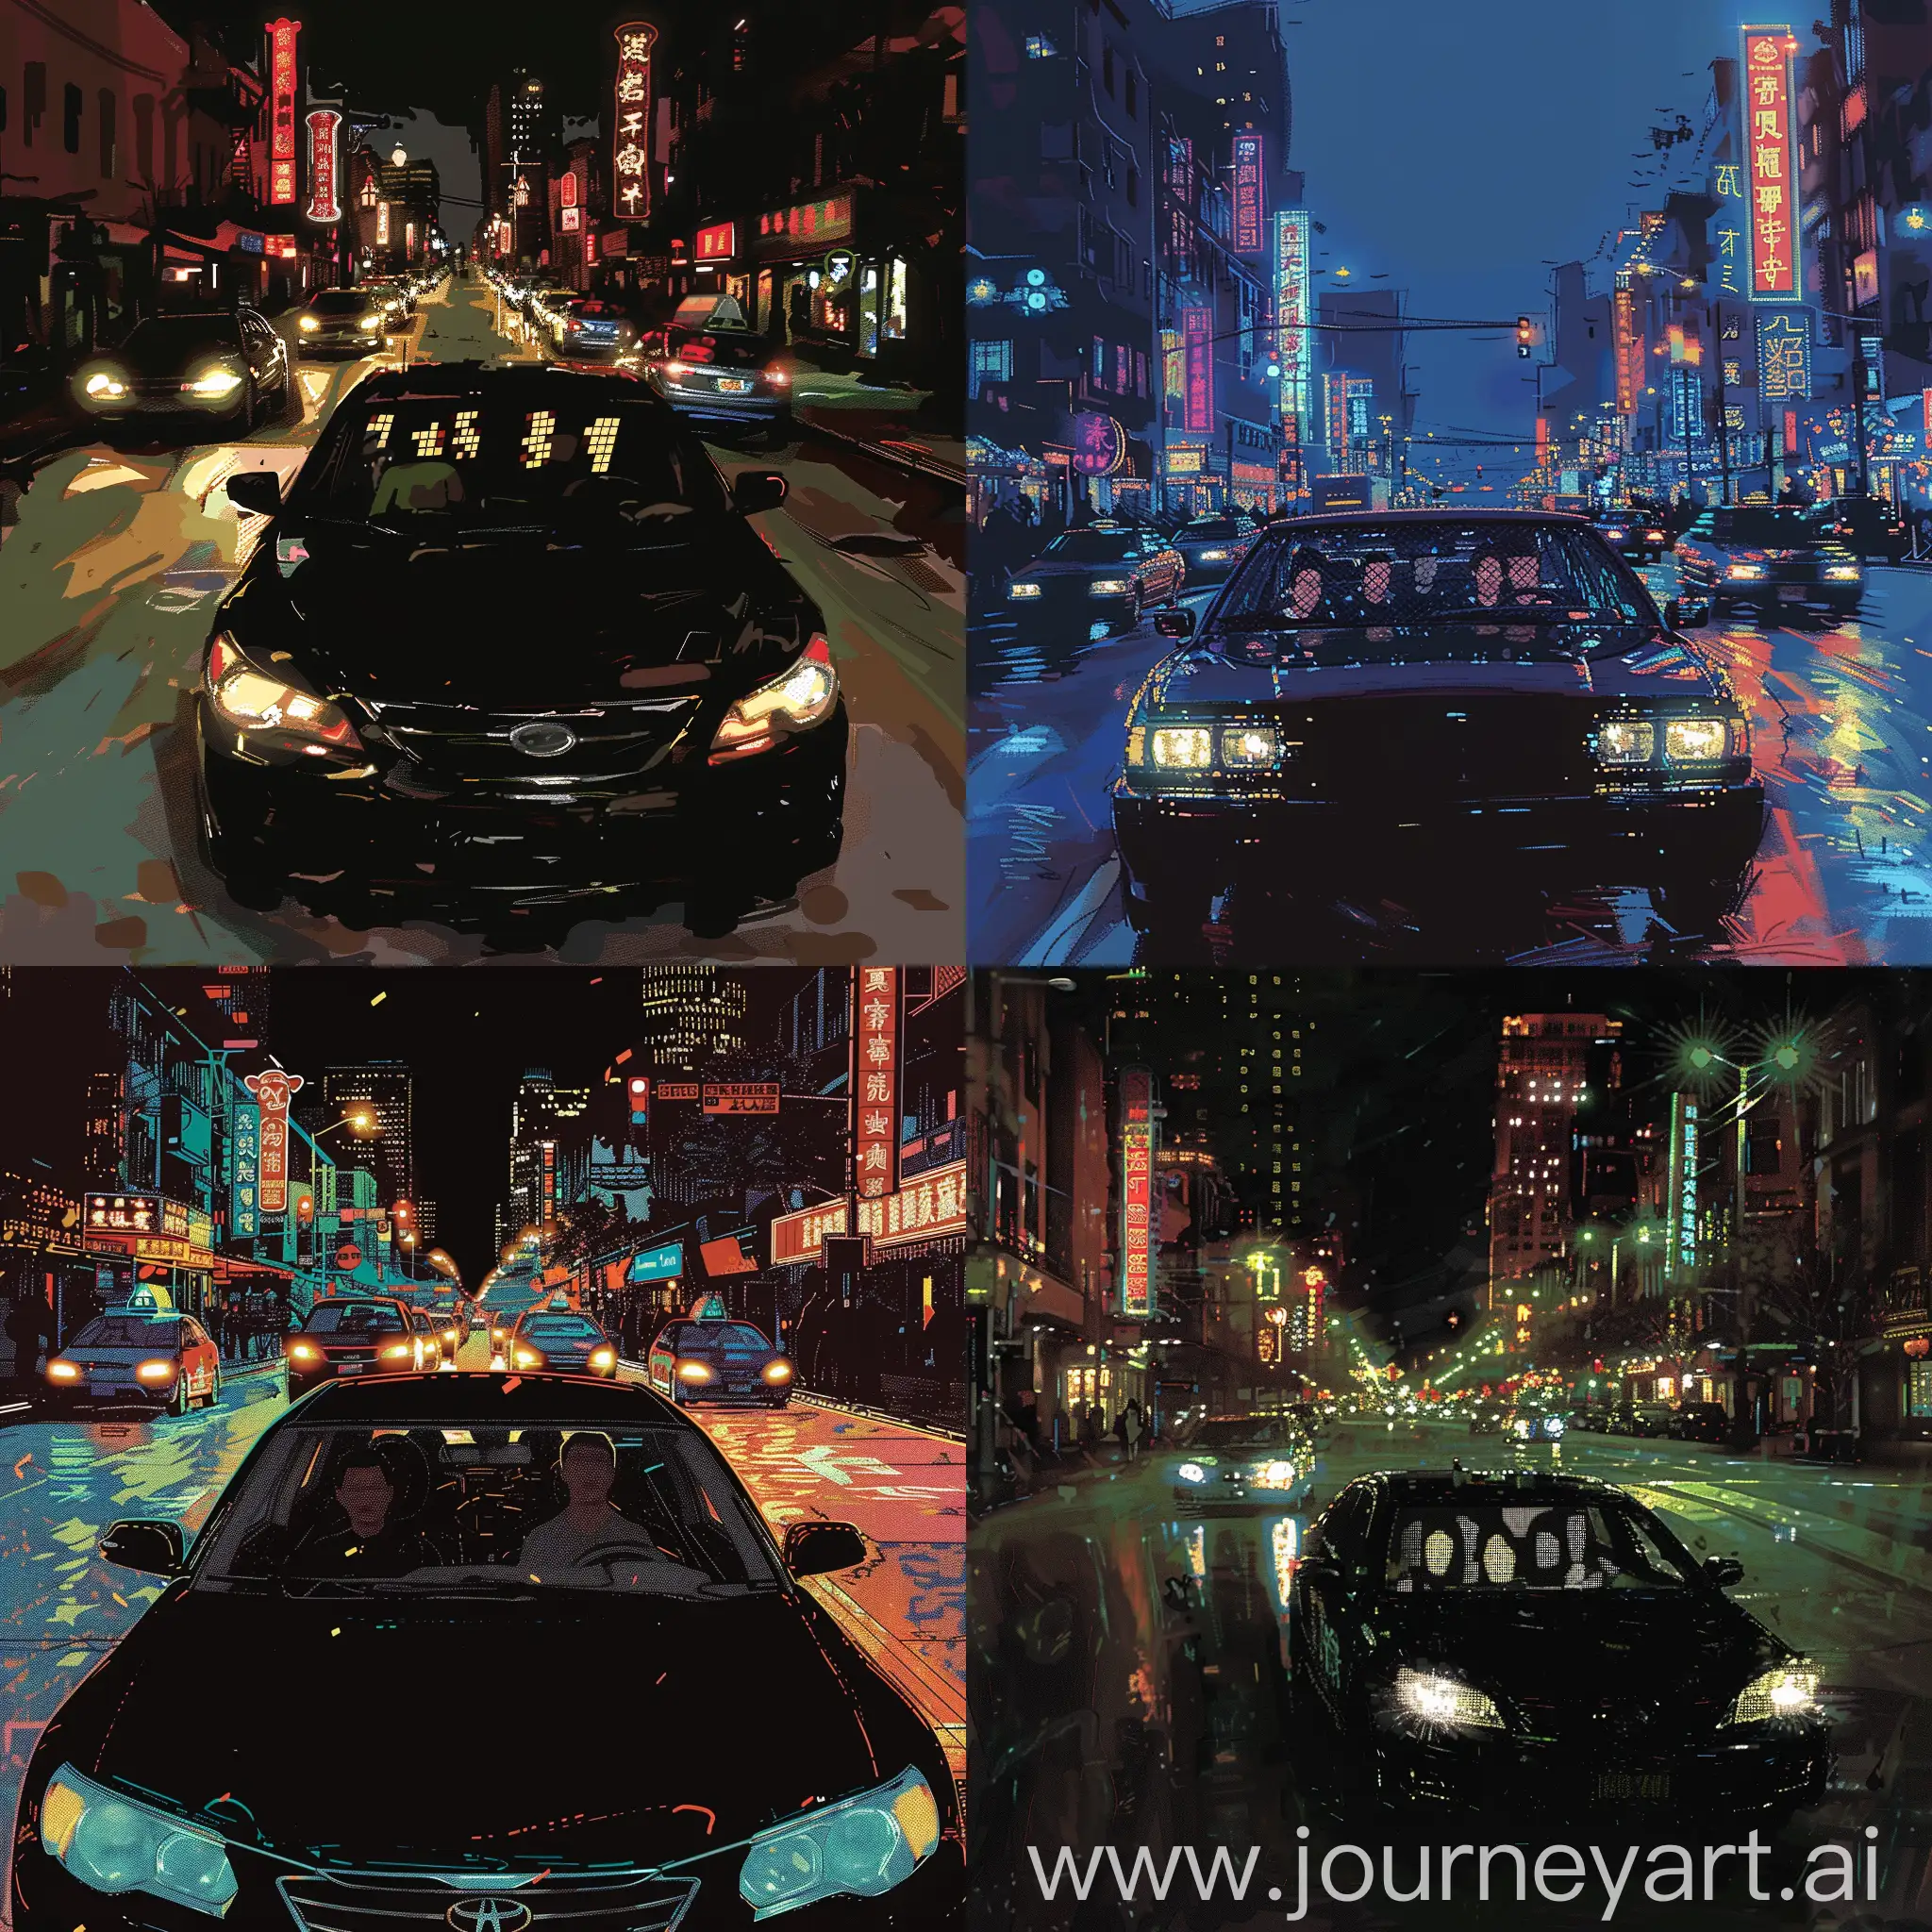 Nocturnal-Journey-Through-Chinatown-Santa-Fe-Highway-Song-Cover-Art